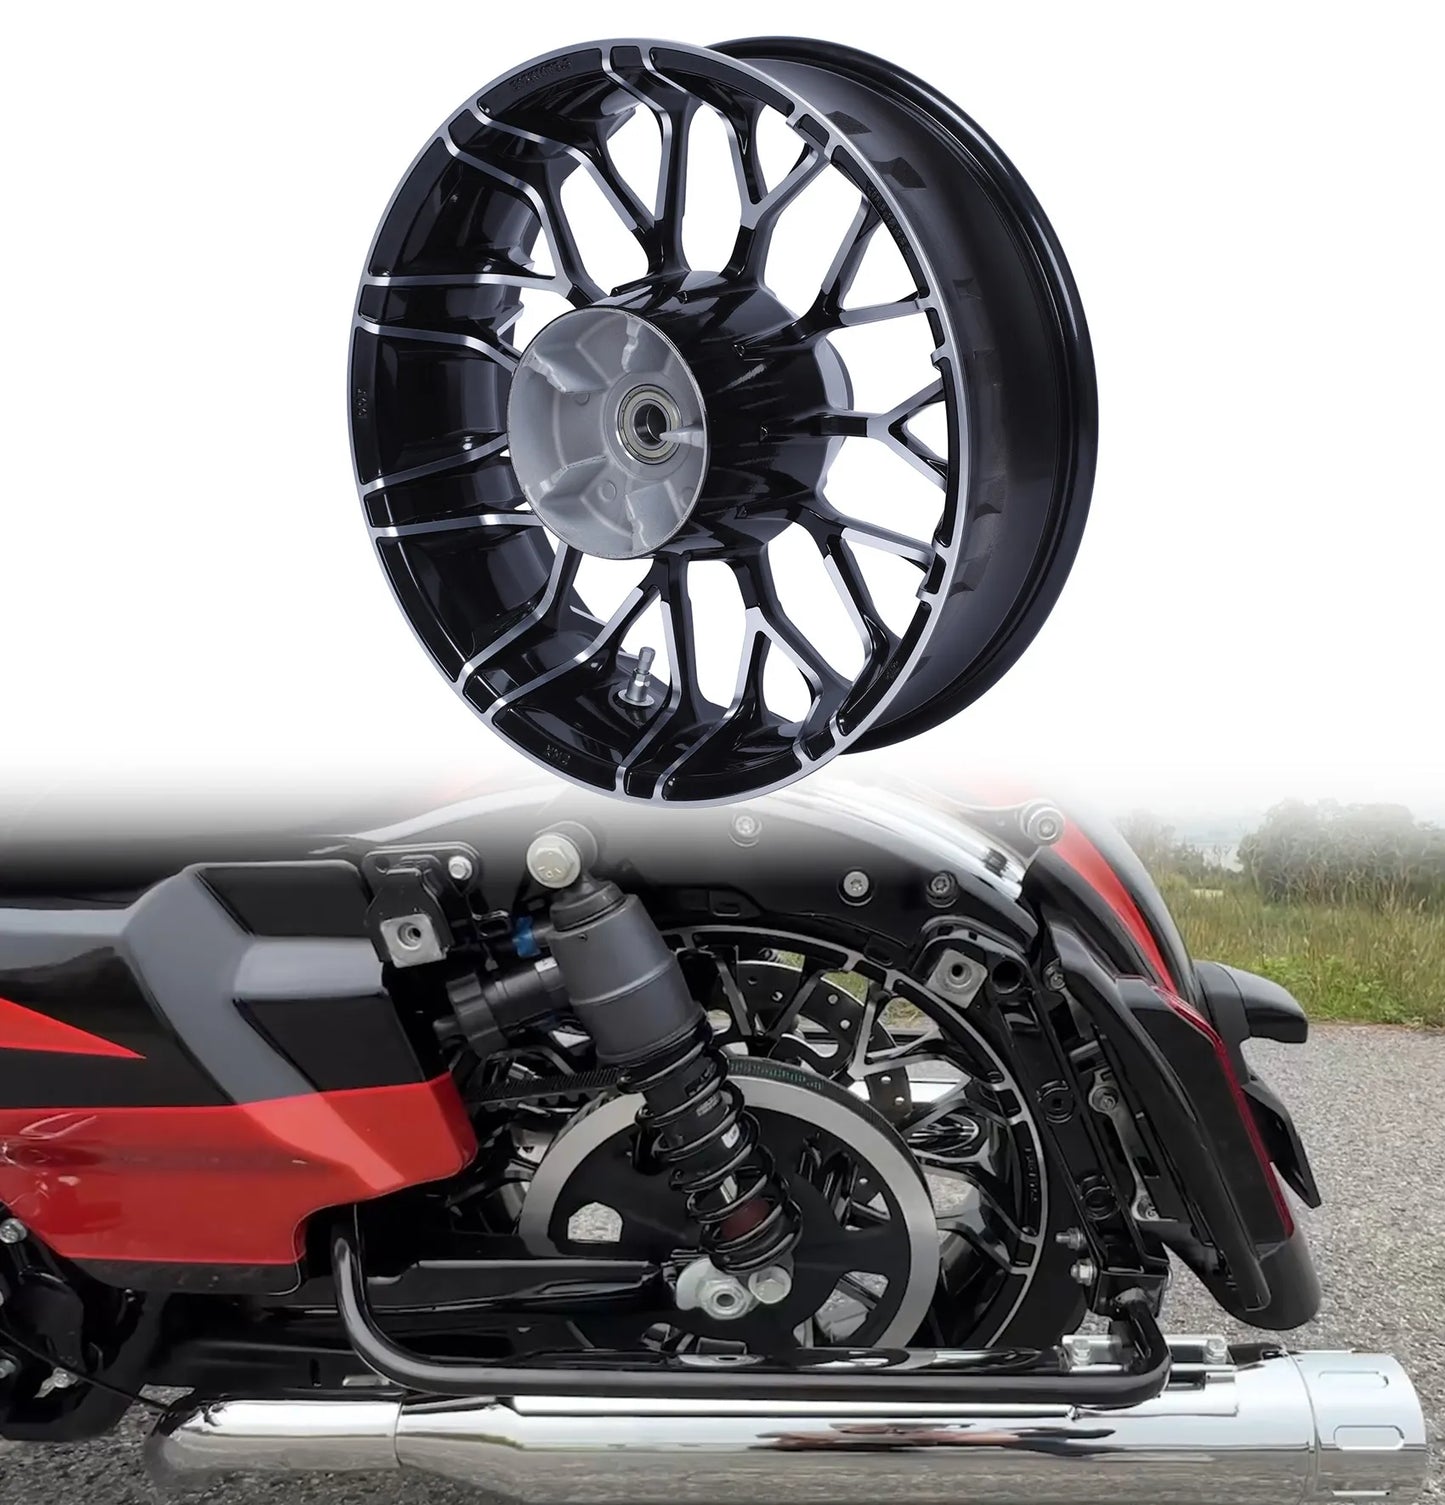 Voodoo Cycle House Custom 18"X5.5" Rear Wheel For Harley-Davidson & Custom Applications Touring Electra Street Glide 2008-UP